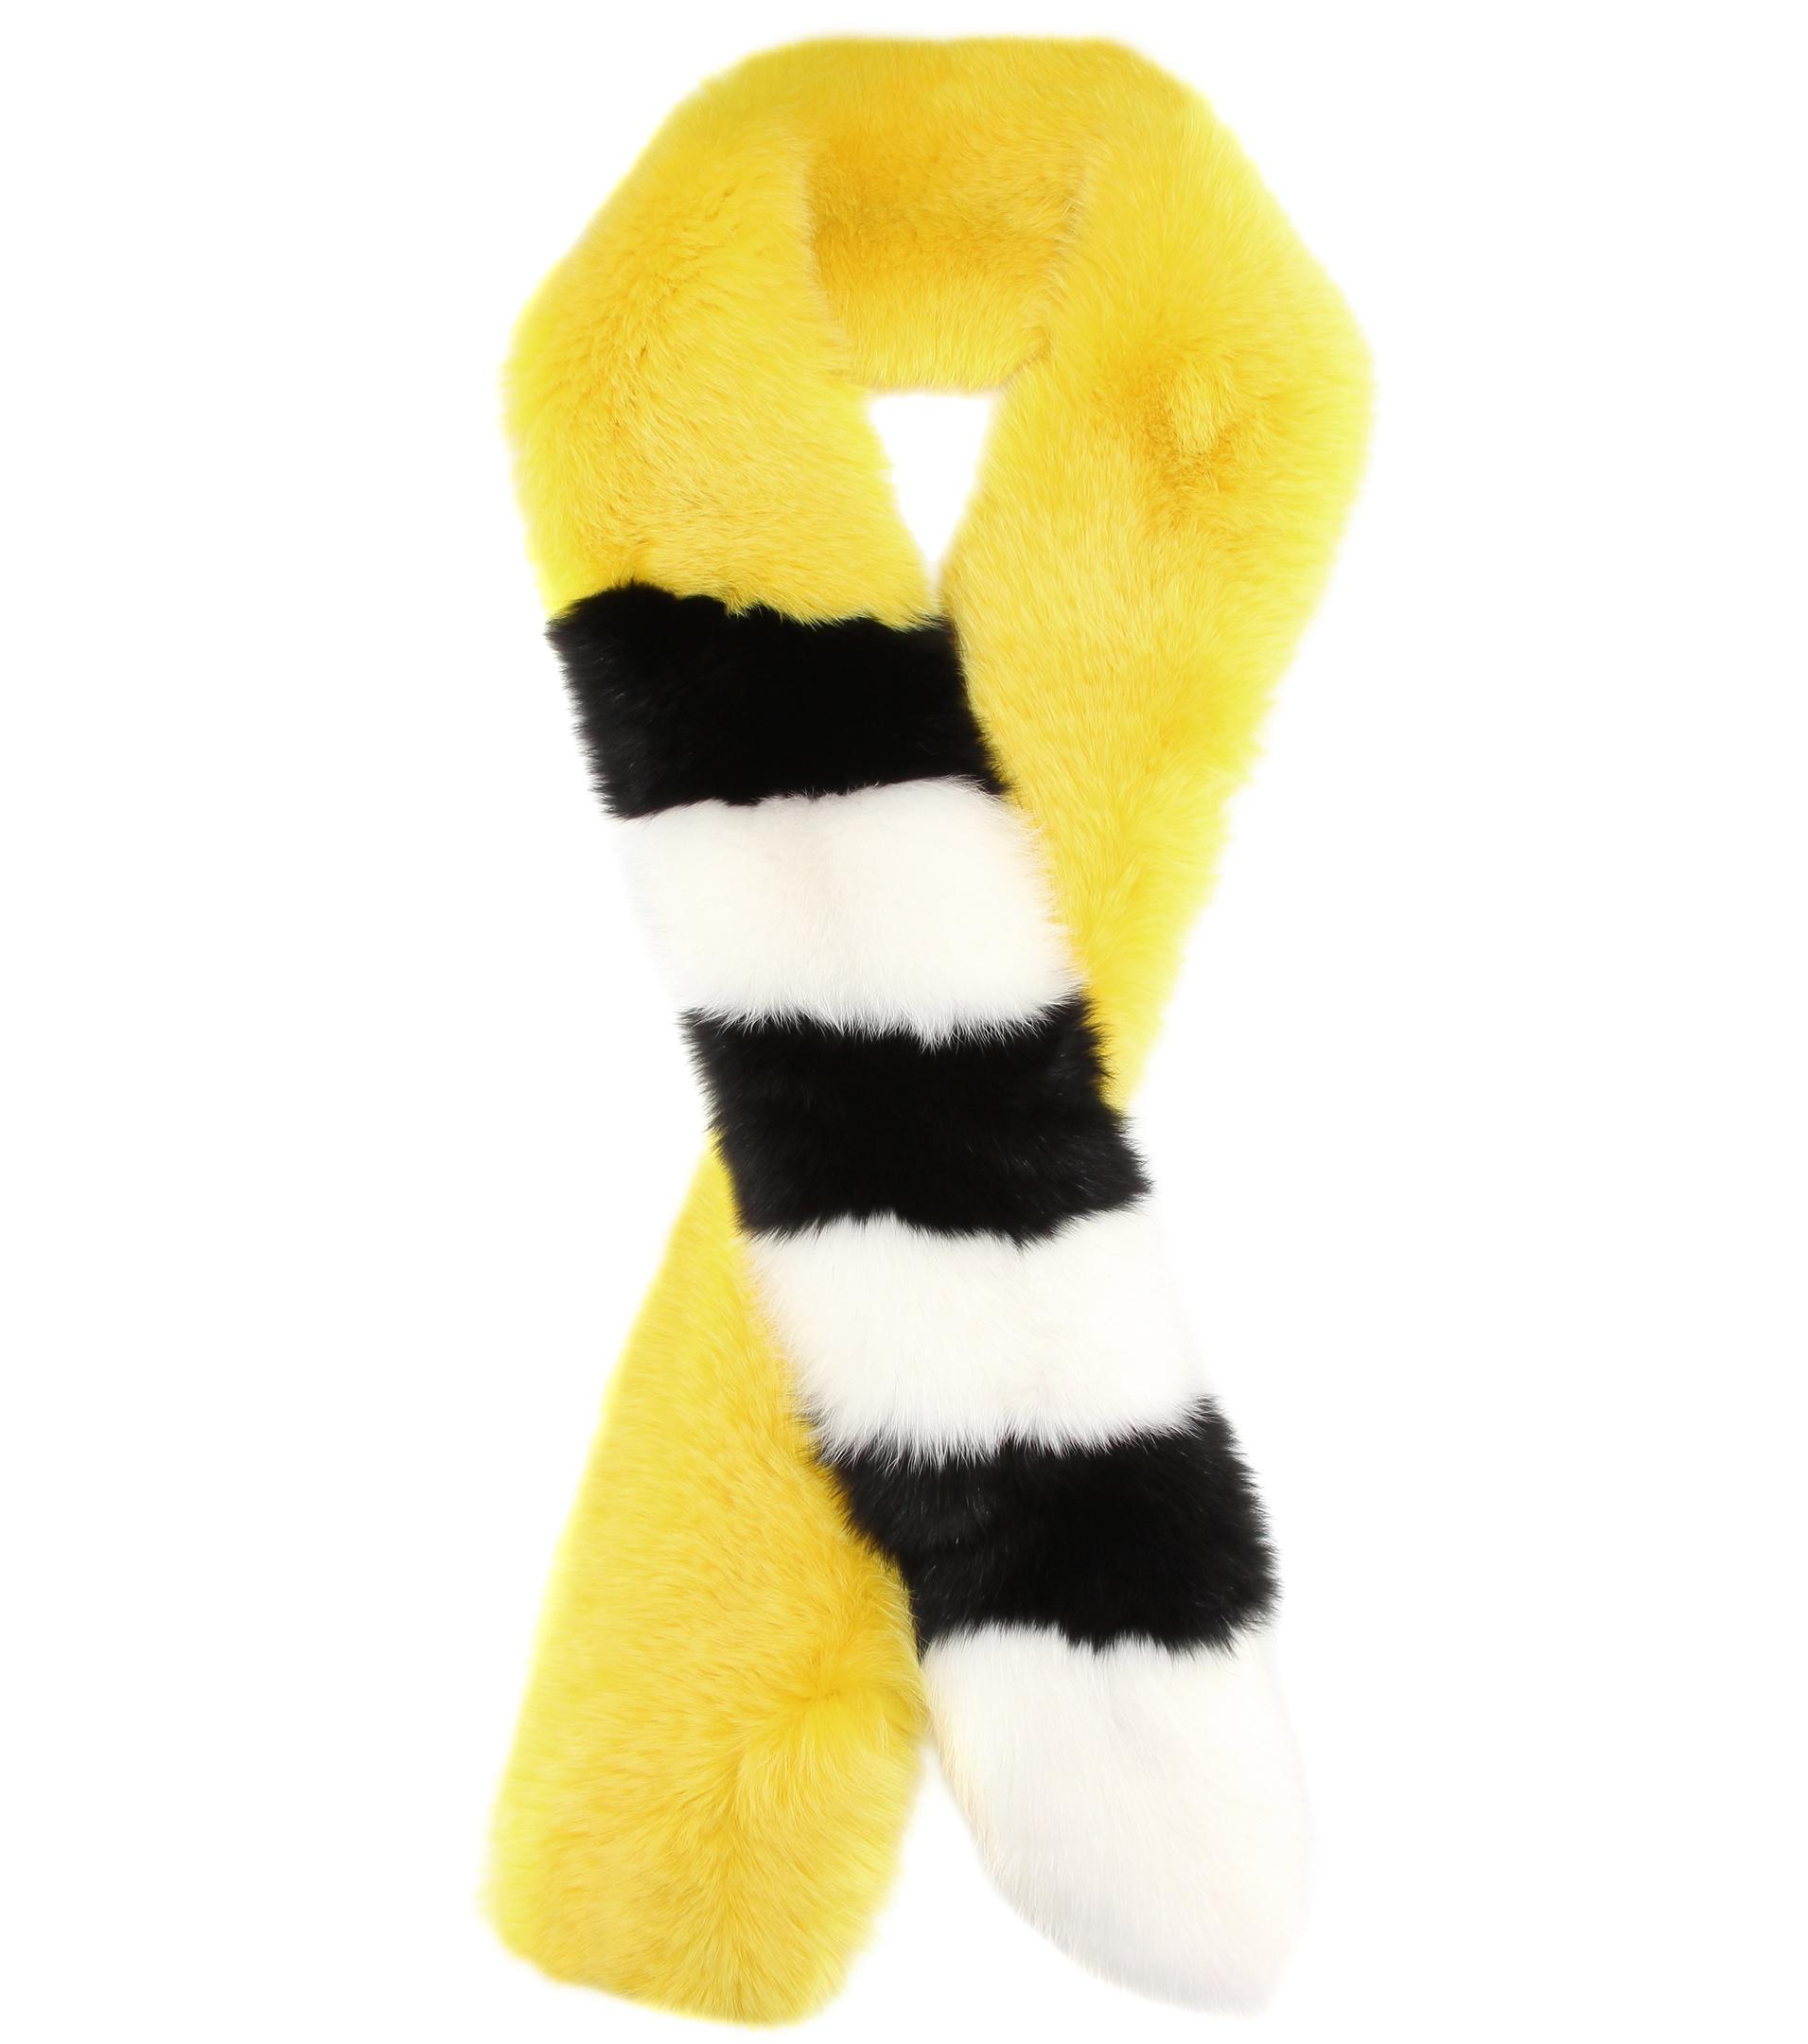 Off-White c/o Virgil Abloh Scarf in Yellow - Lyst